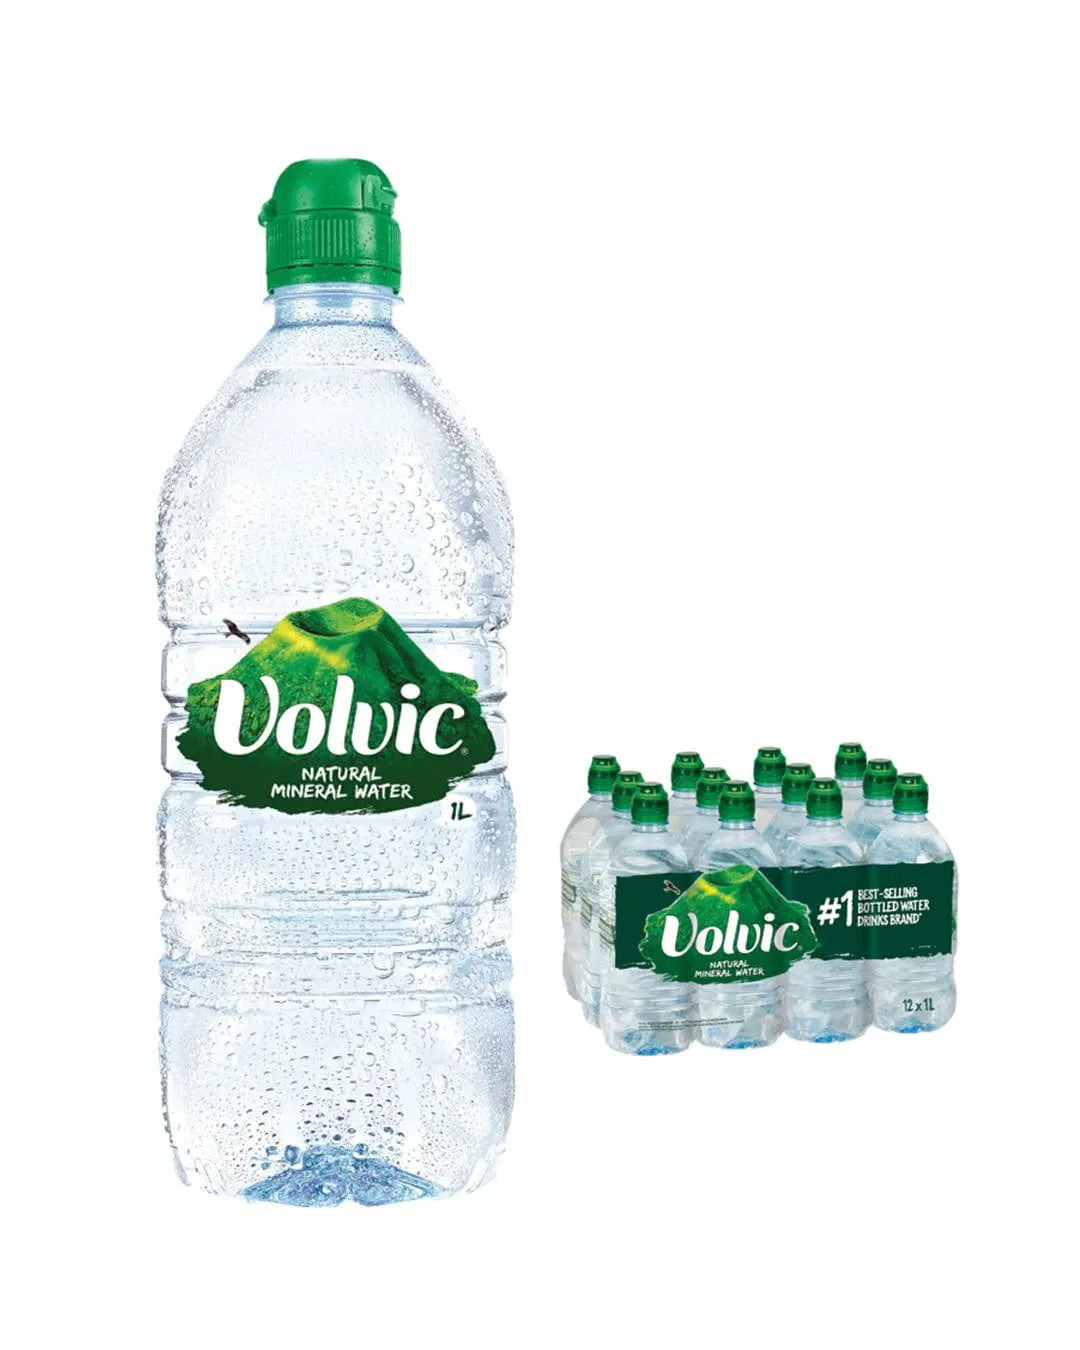 Volvic - Still Water - Sorted Waters